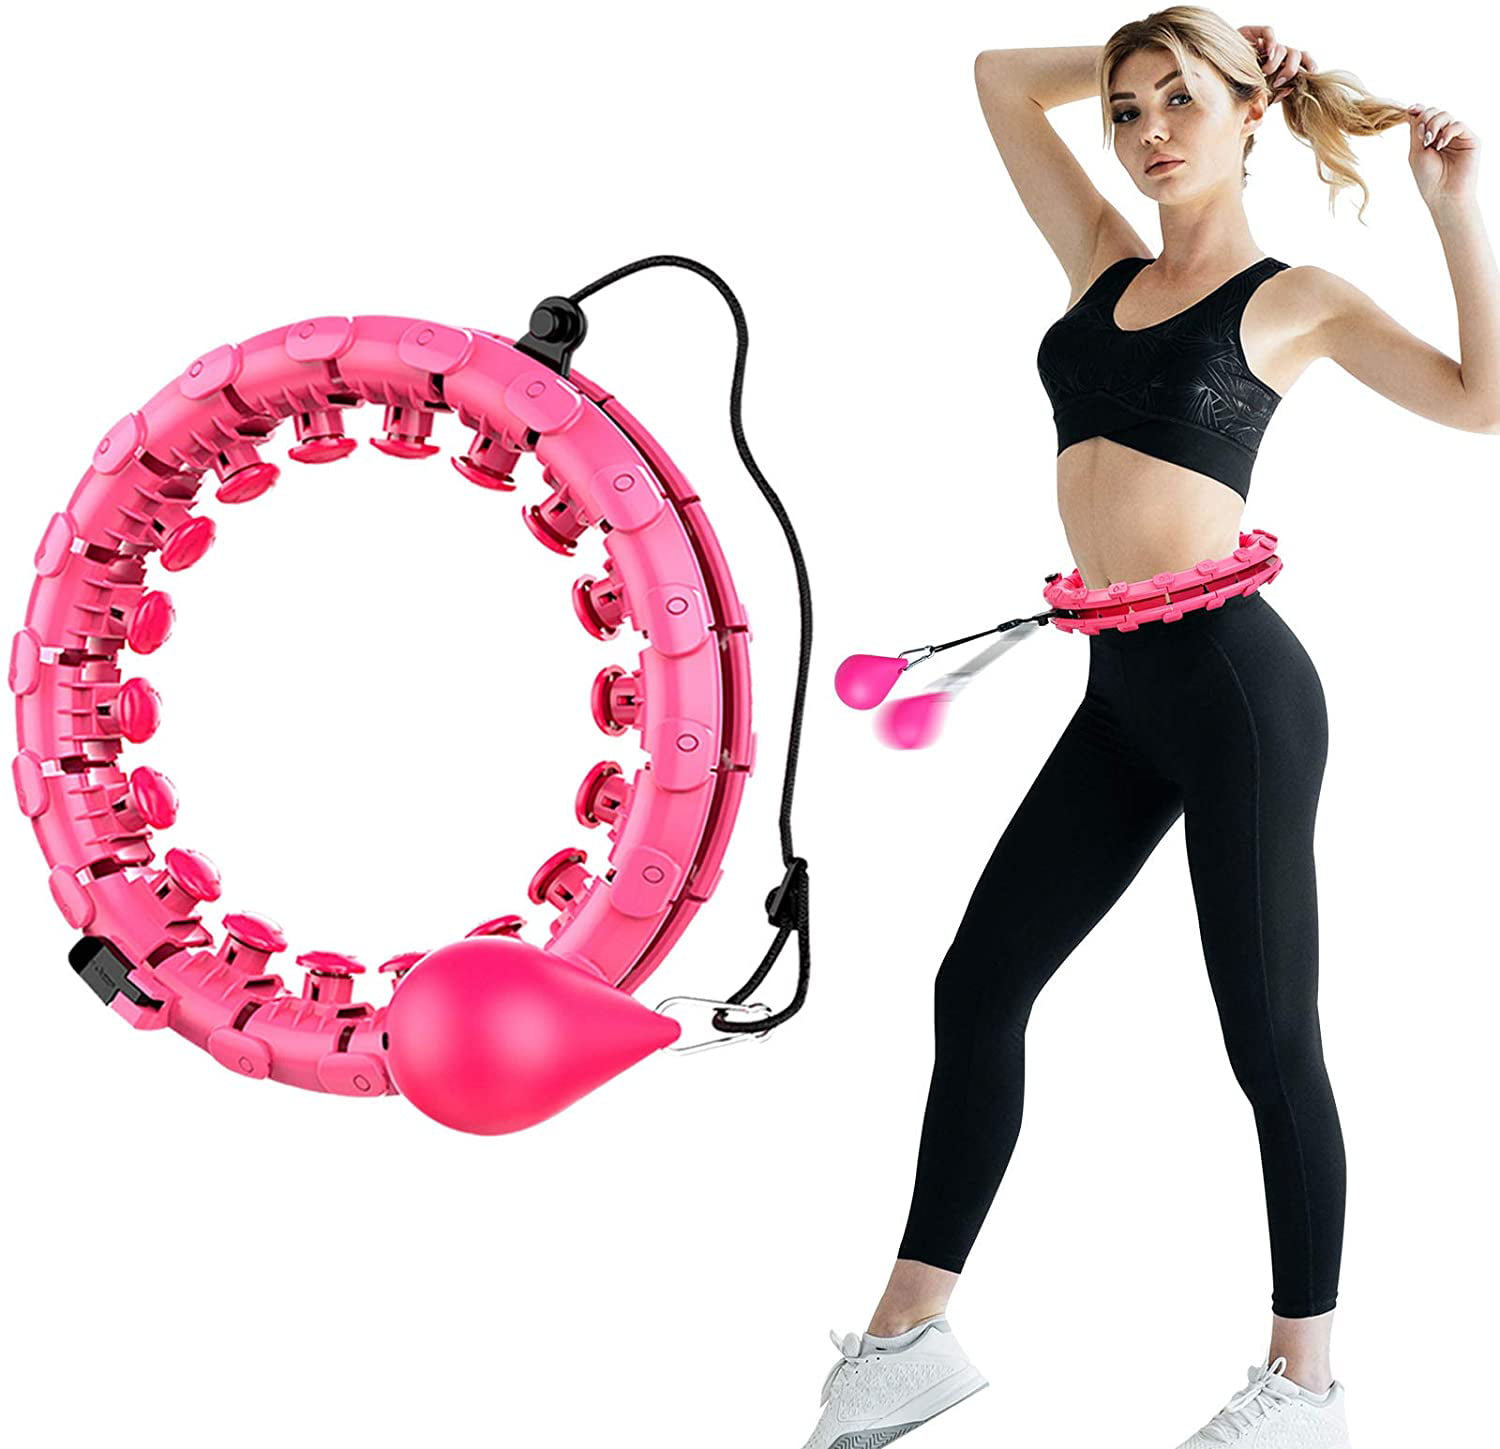 Abdomen and Waist Massage Charm Arbre Smart Hoola Hoop with Centrifugal Ball Non-fall Design Exercising Hoop for Weight-loss and Fitness Home-based Sports with Intelligent Timer. 